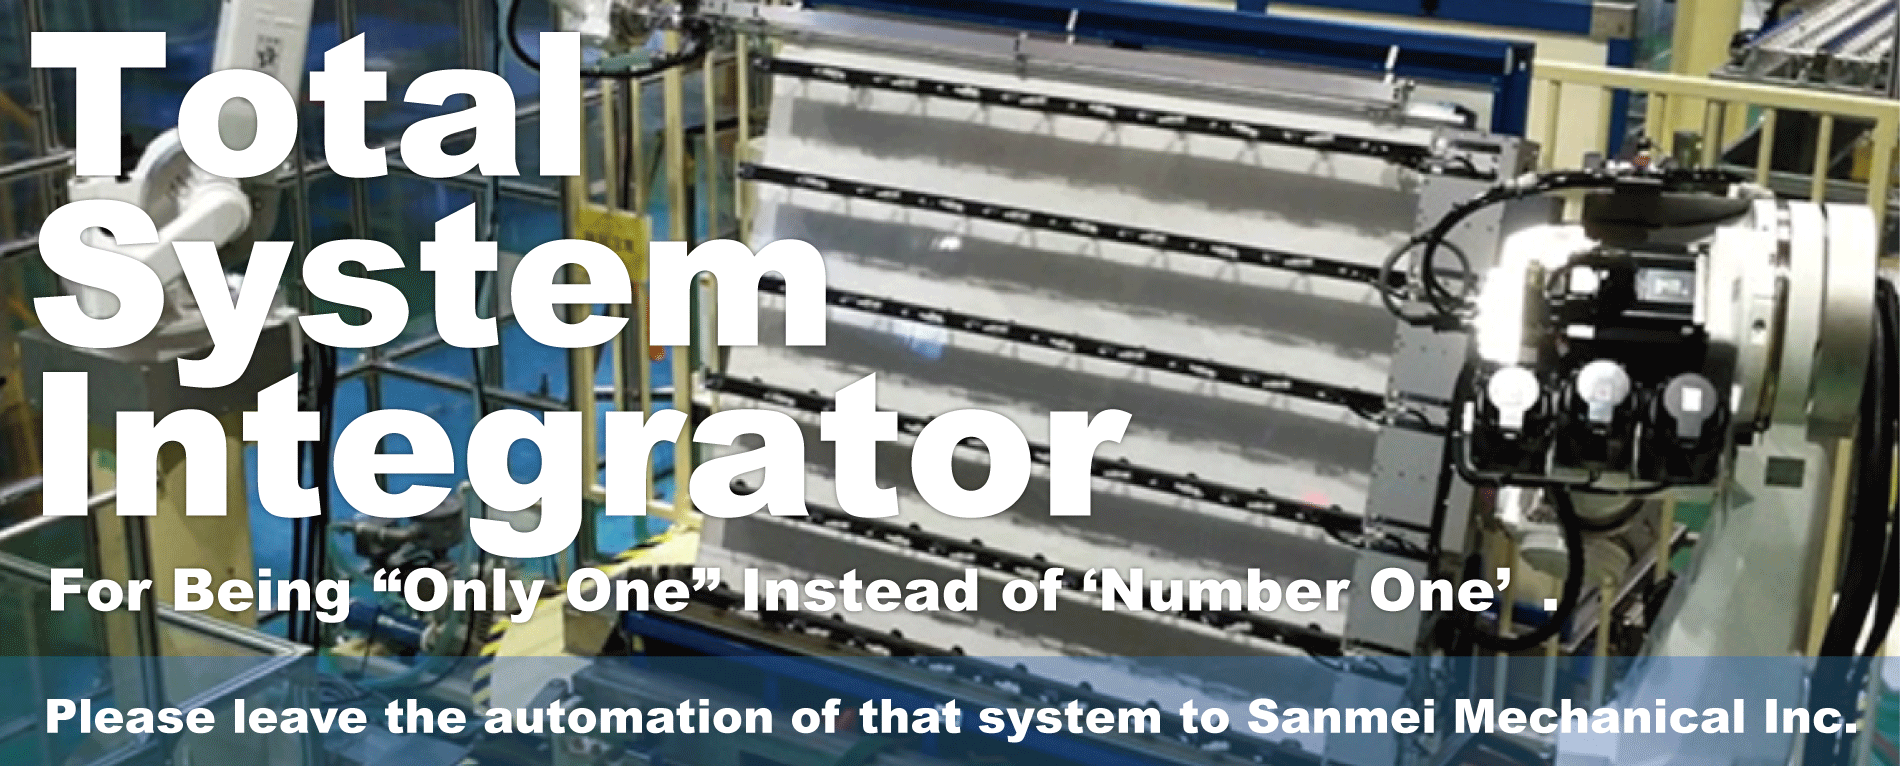 Please leave the automation of that system to sanmei mechanical inc.